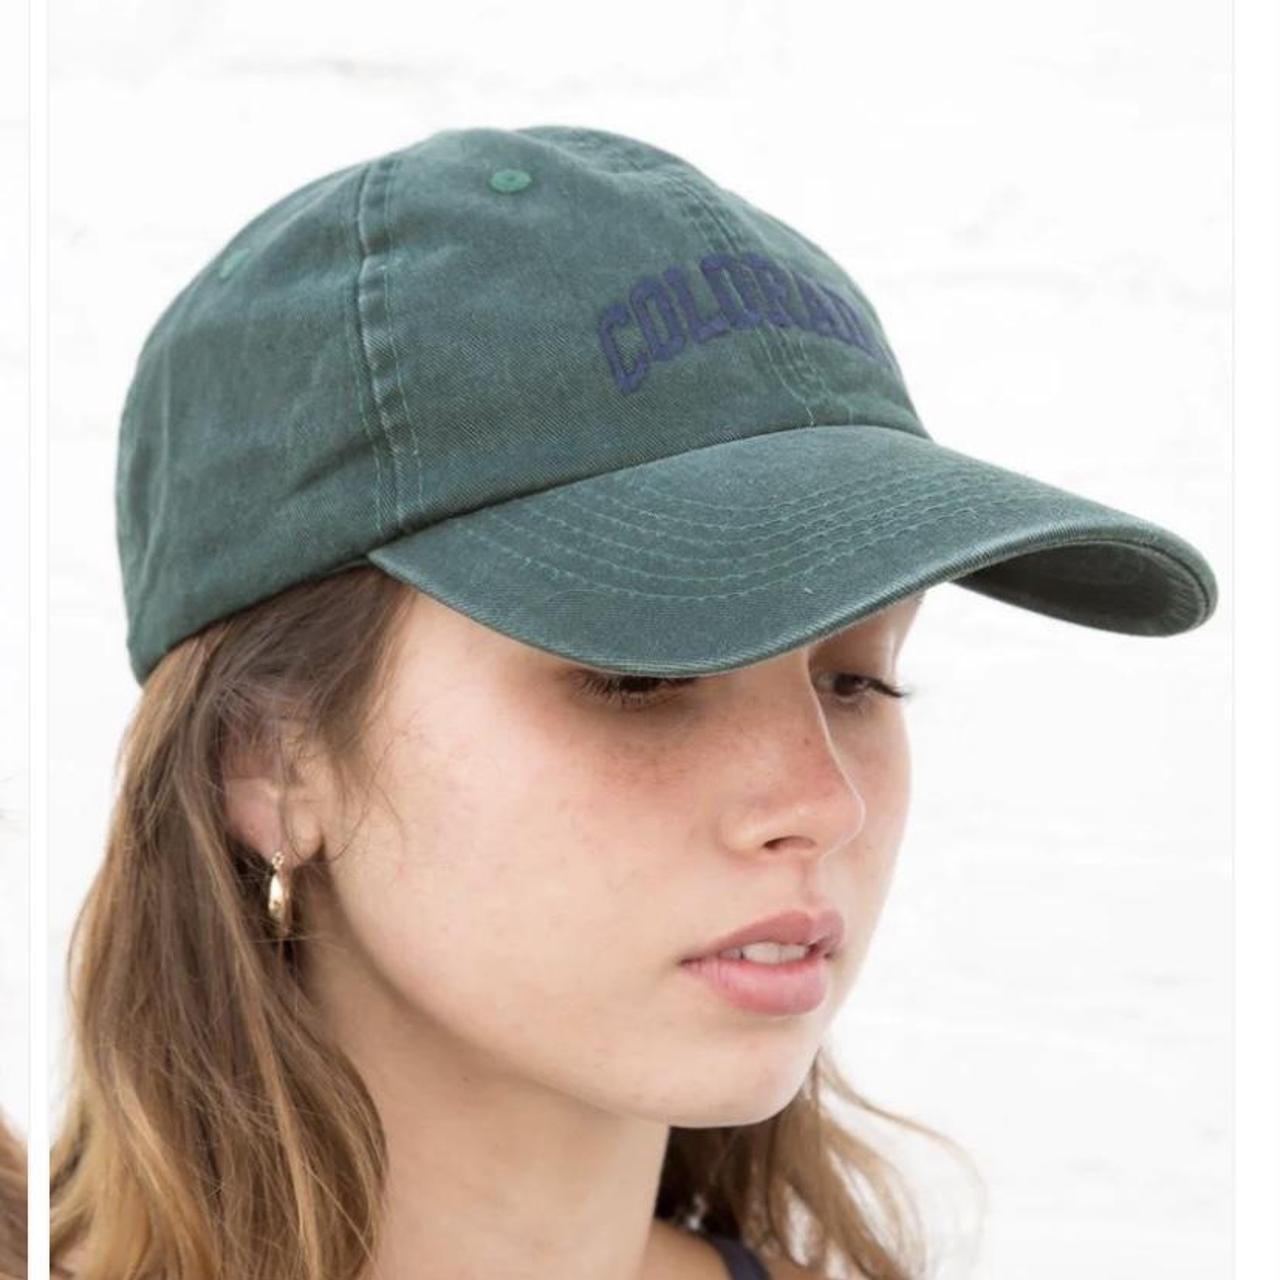 Brandy Melville Women's Green and Navy Hat (2)